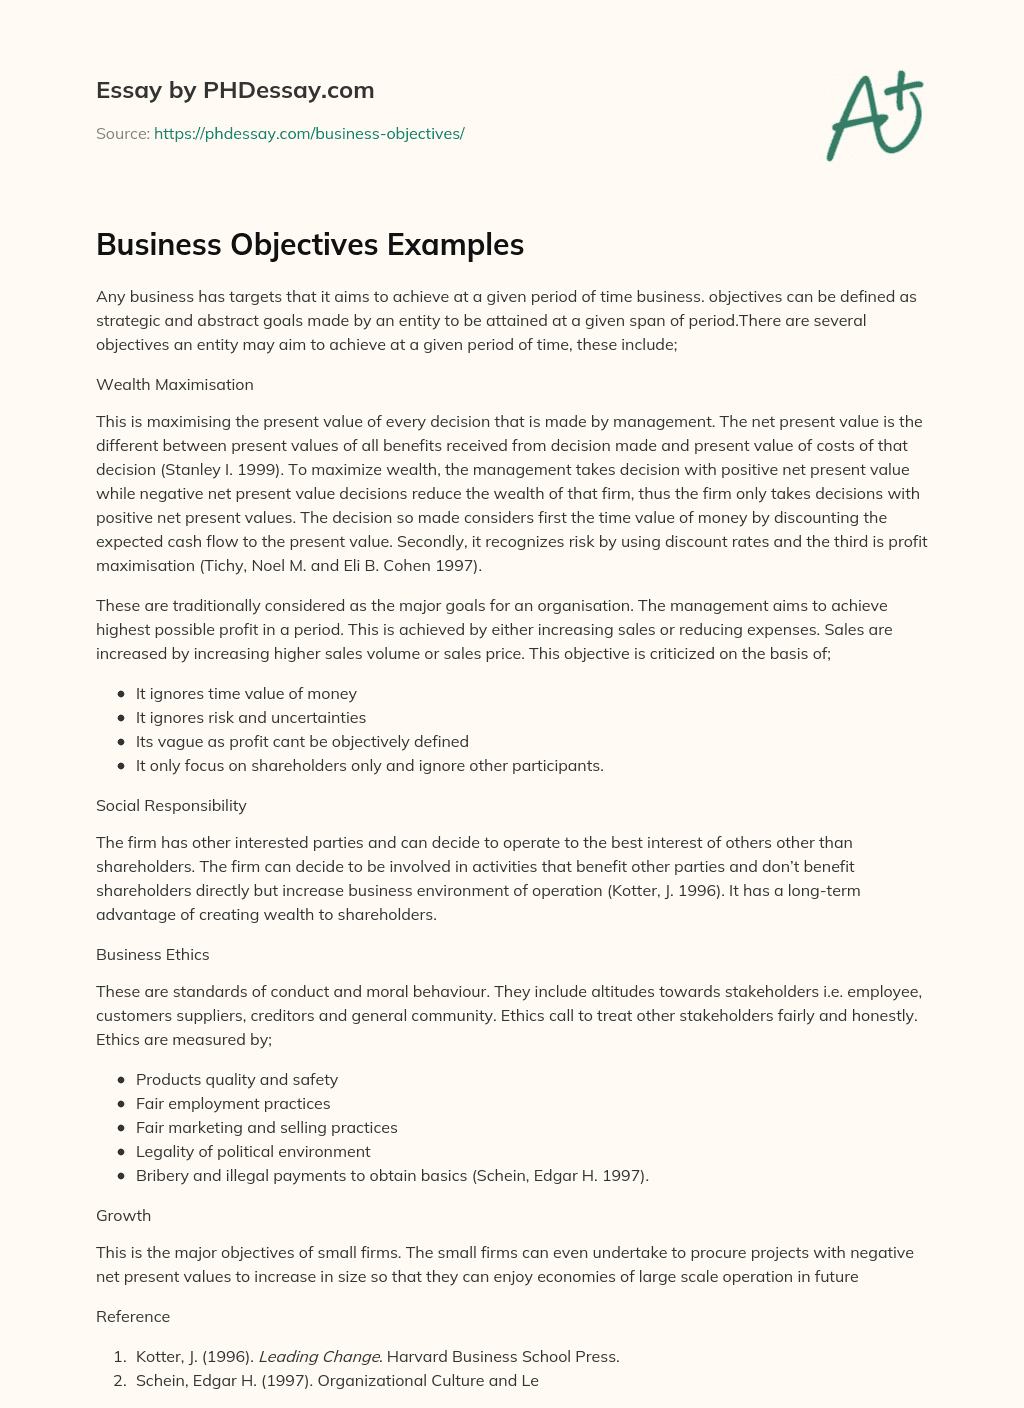 essay about objectives of business